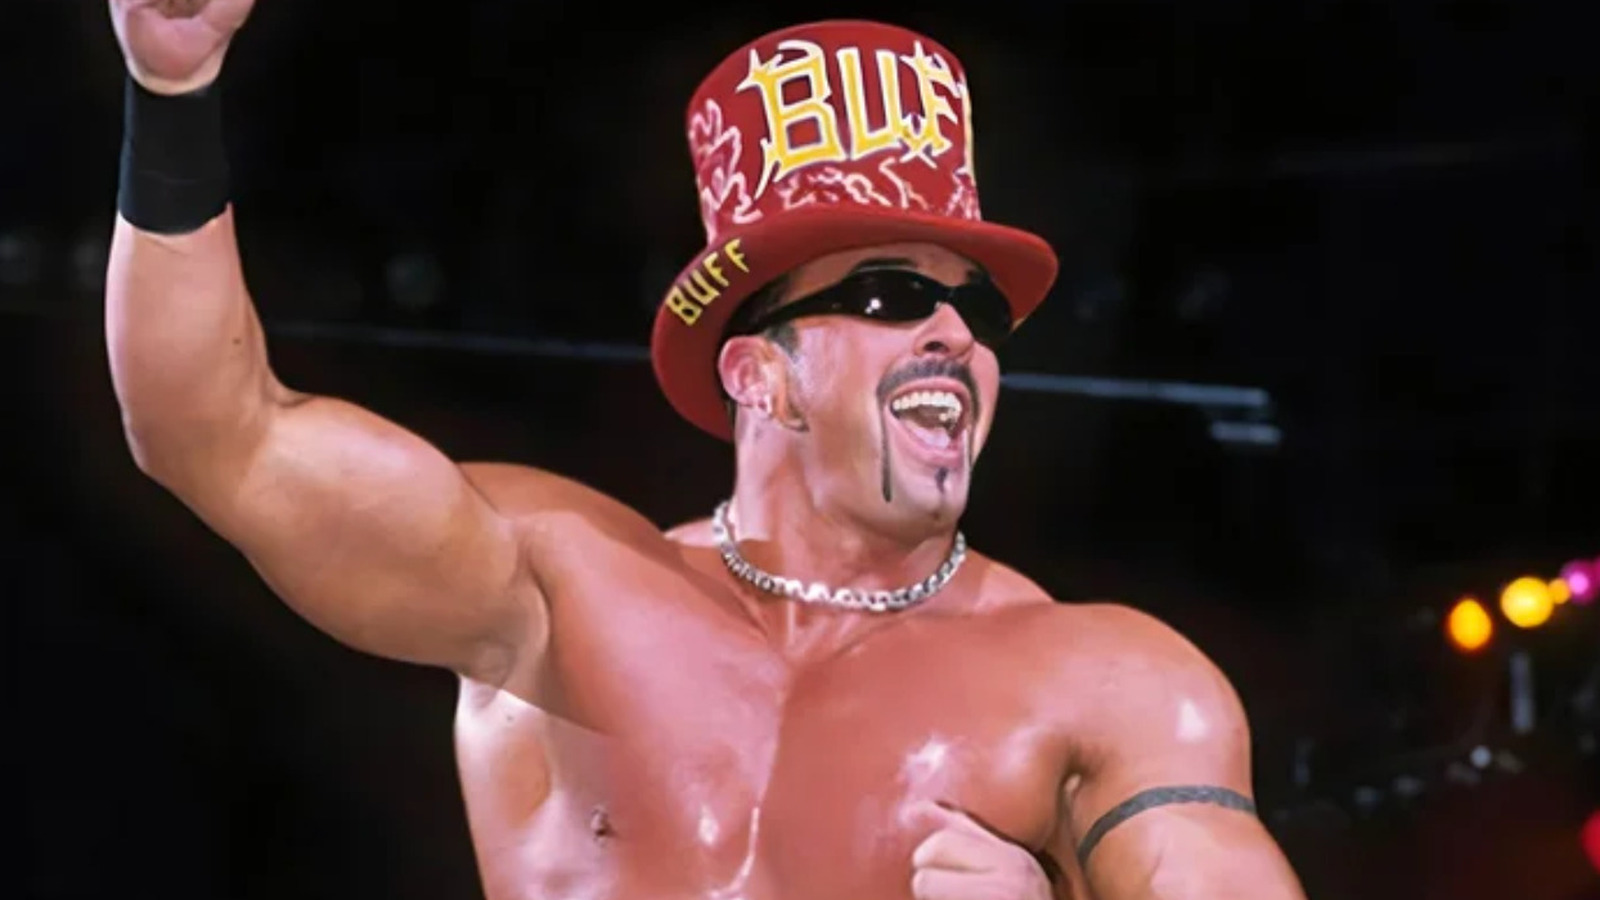 Former WCW Star Buff Bagwell Wins Gold At Memphis Wrestling Event